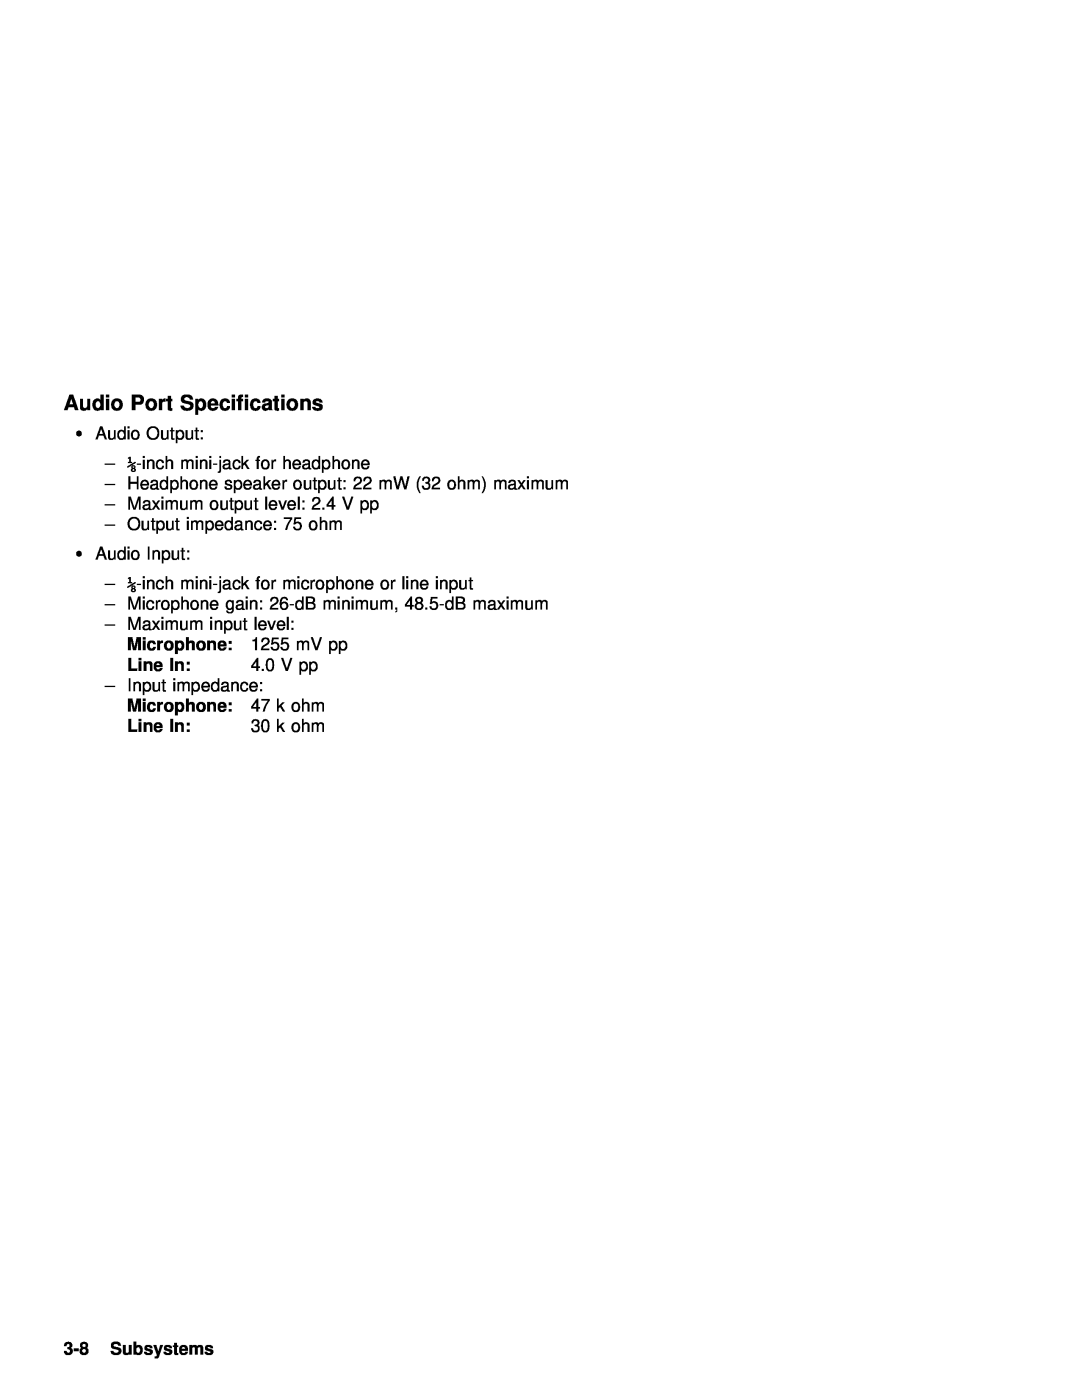 IBM 770 manual Audio Port Specifications, Line, Subsystems 